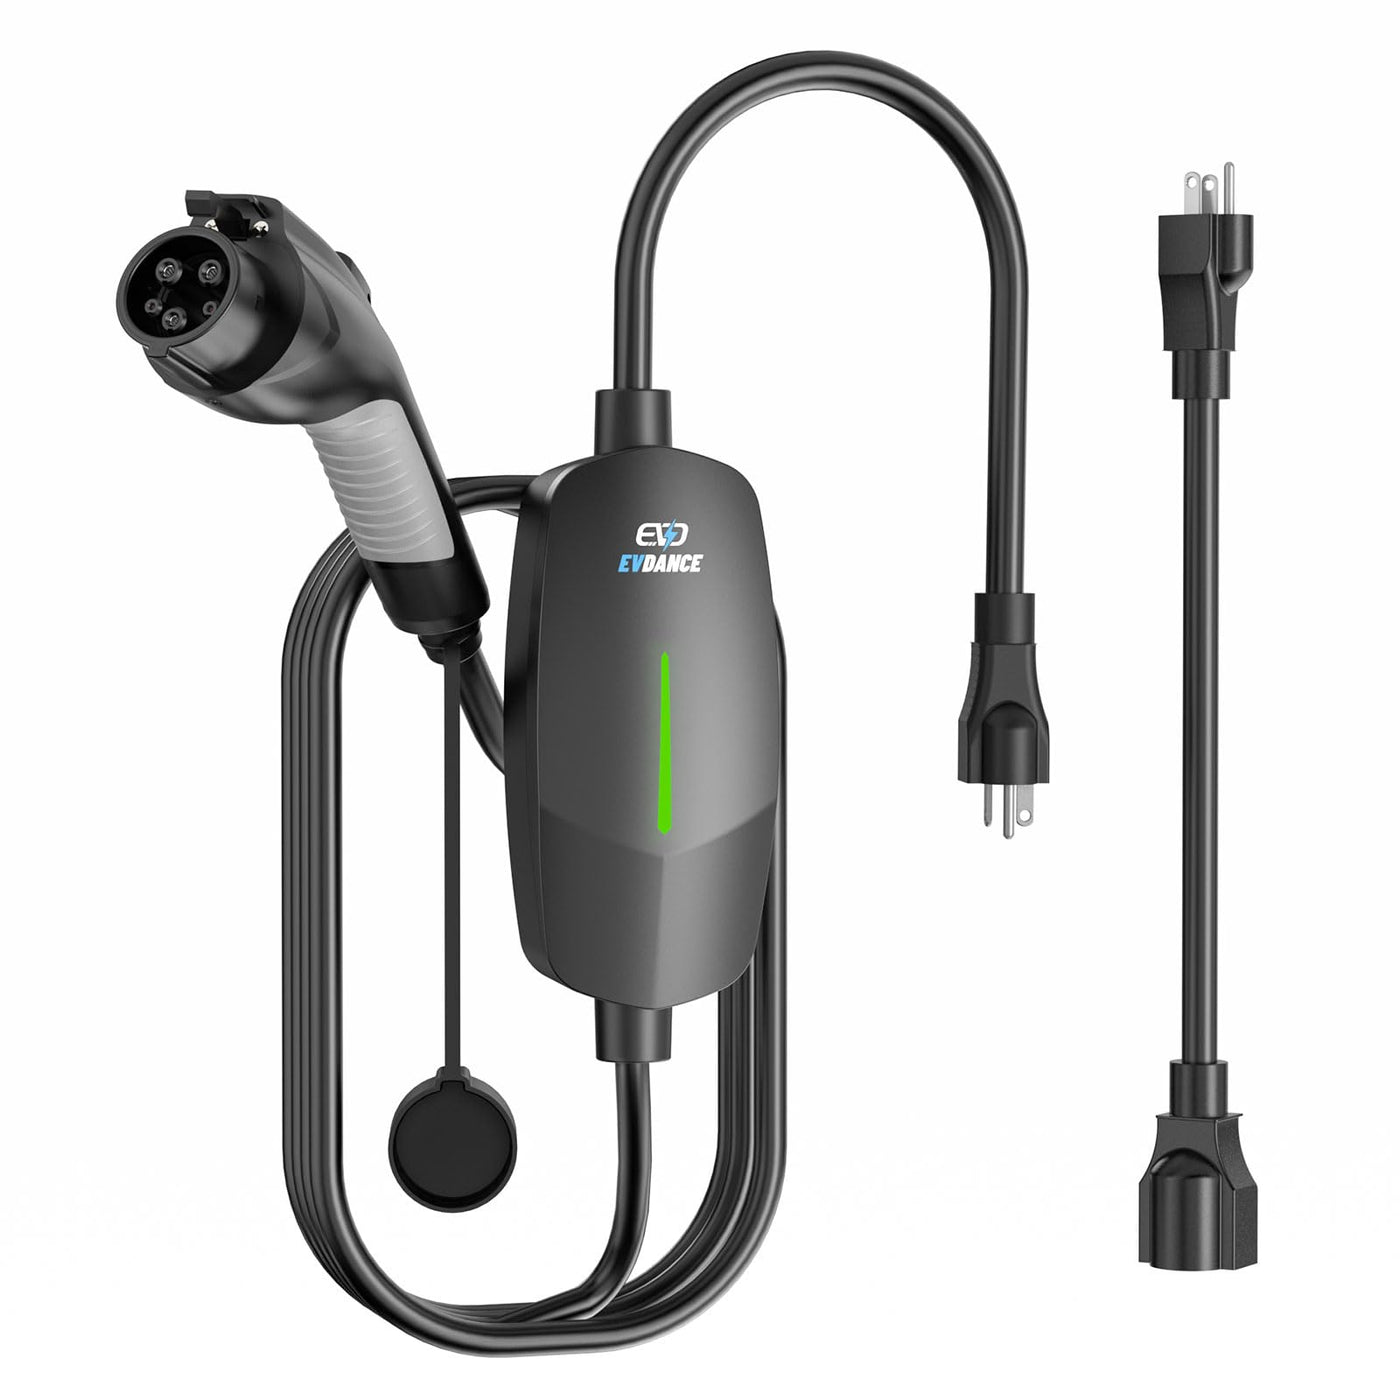 Level 2 Black Electric Vehicle Portable Charger By EVDANCE